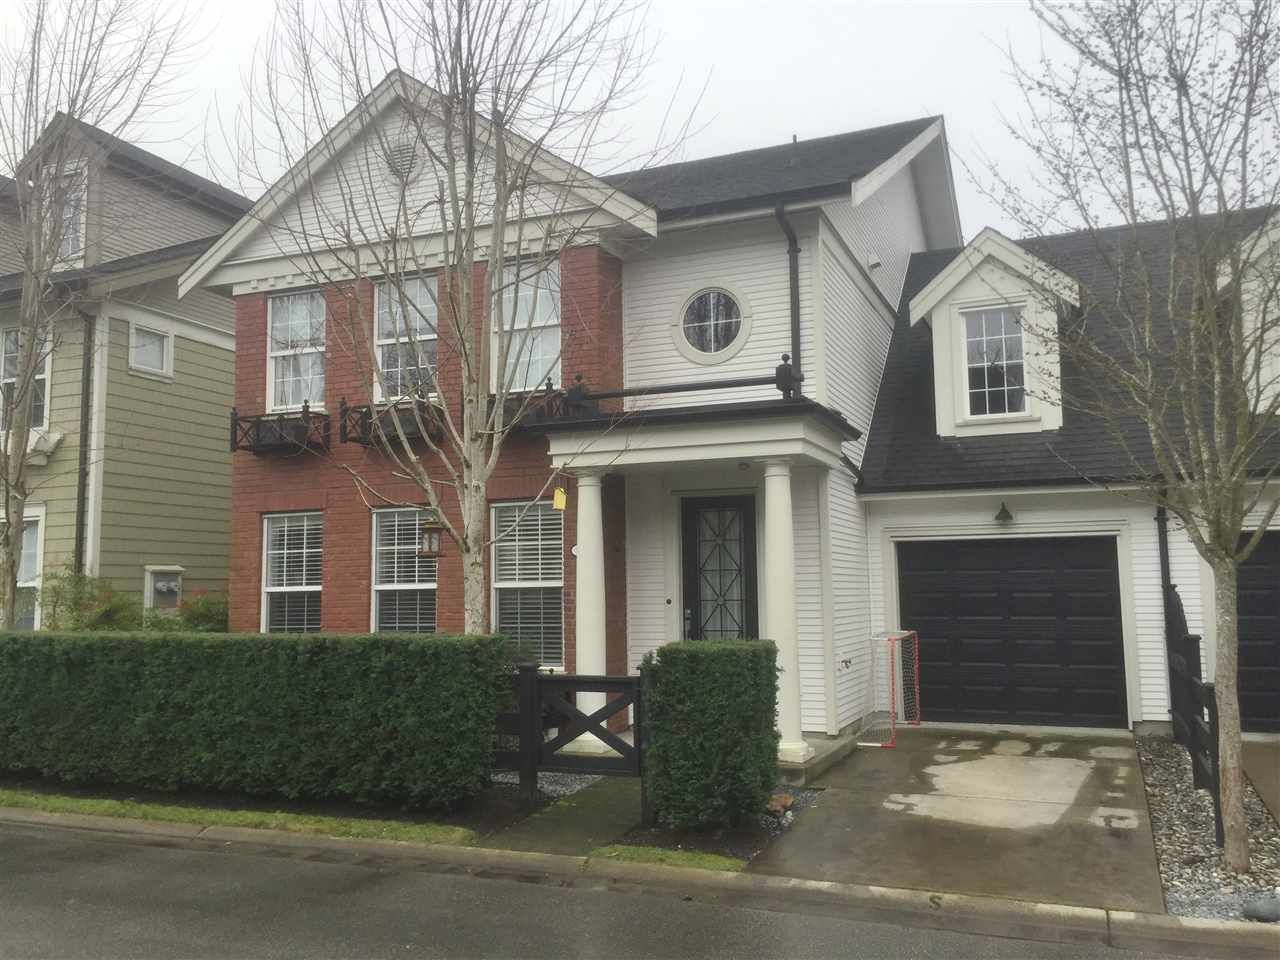 Main Photo: 21 19490 FRASER WAY in : South Meadows Townhouse for sale (Pitt Meadows)  : MLS®# R2035087